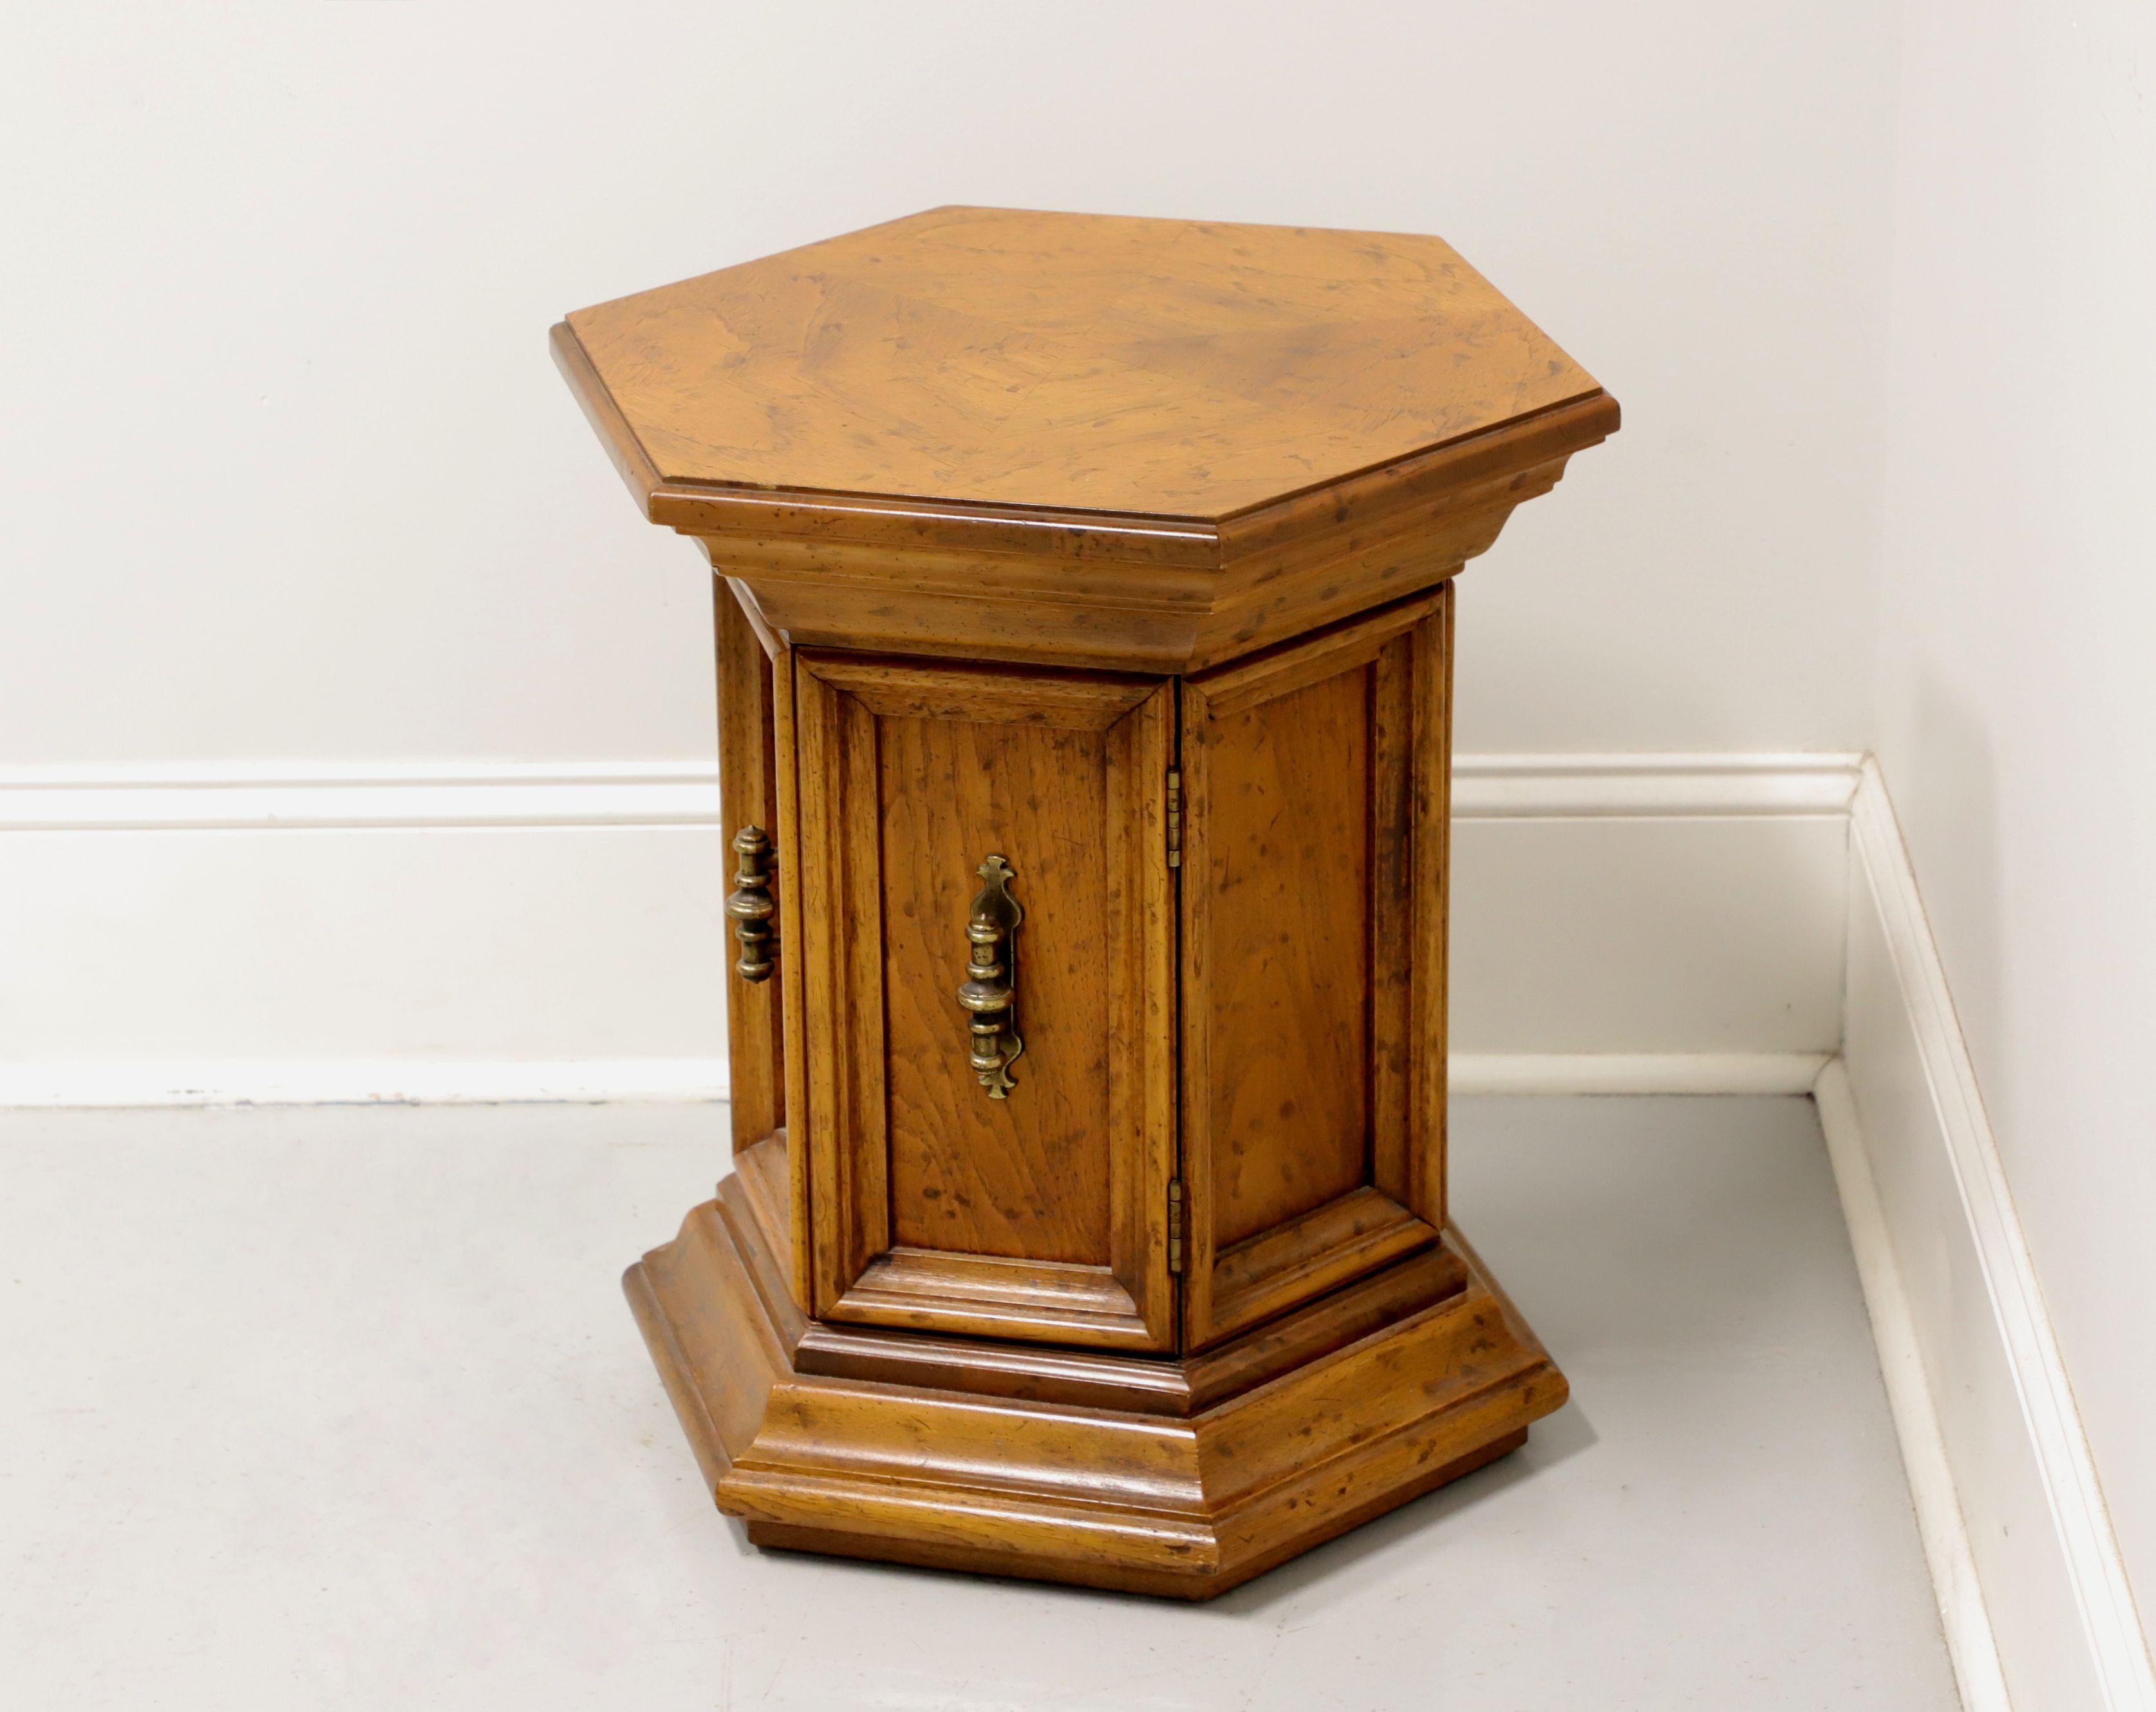 Spanish Colonial DREXEL Velero Mid 20th Century Spanish Style Hexagonal Cabinet Accent Table For Sale